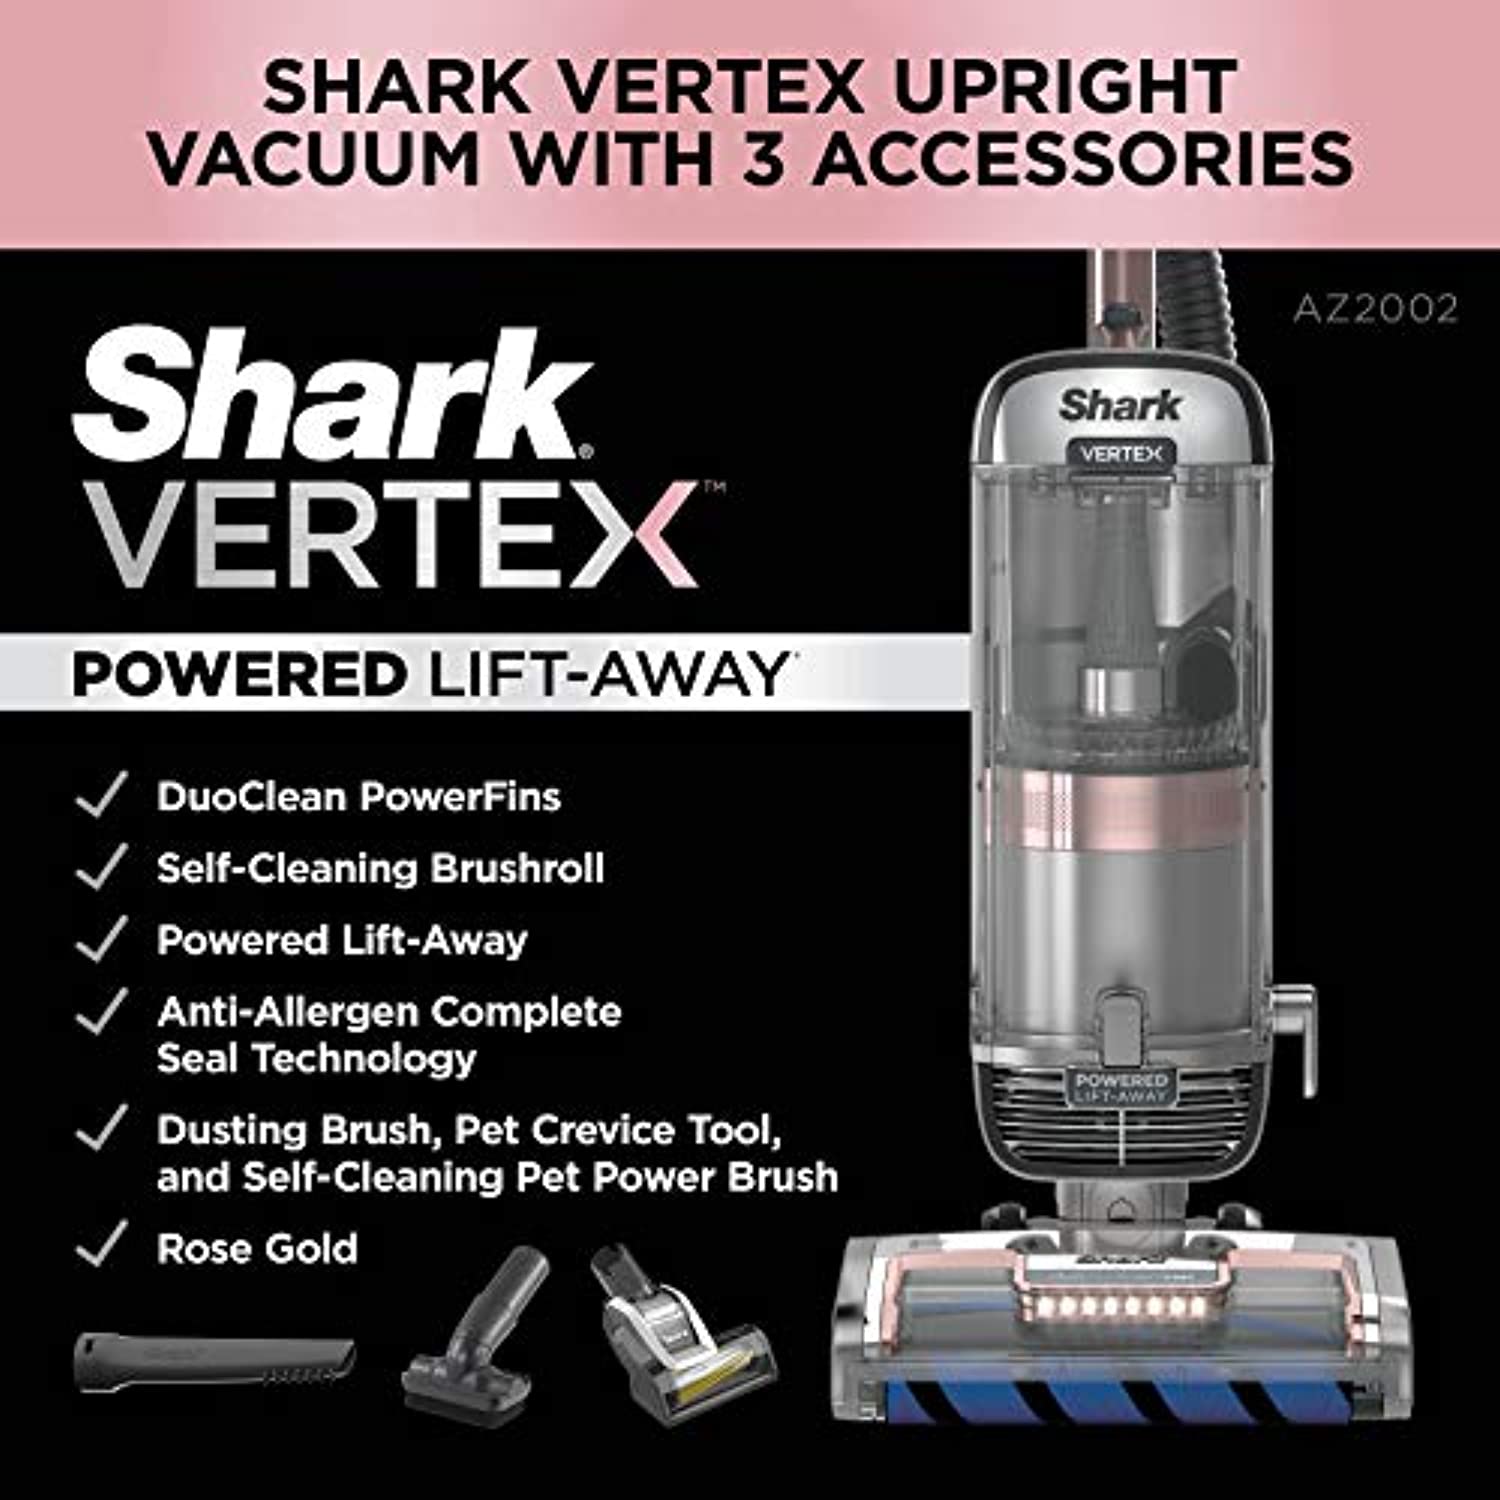 Shark - AZ2002 Vertex DuoClean PowerFin Upright Vacuum with Powered Lift-Away and Self-Cleaning Brushroll- Rose Gold